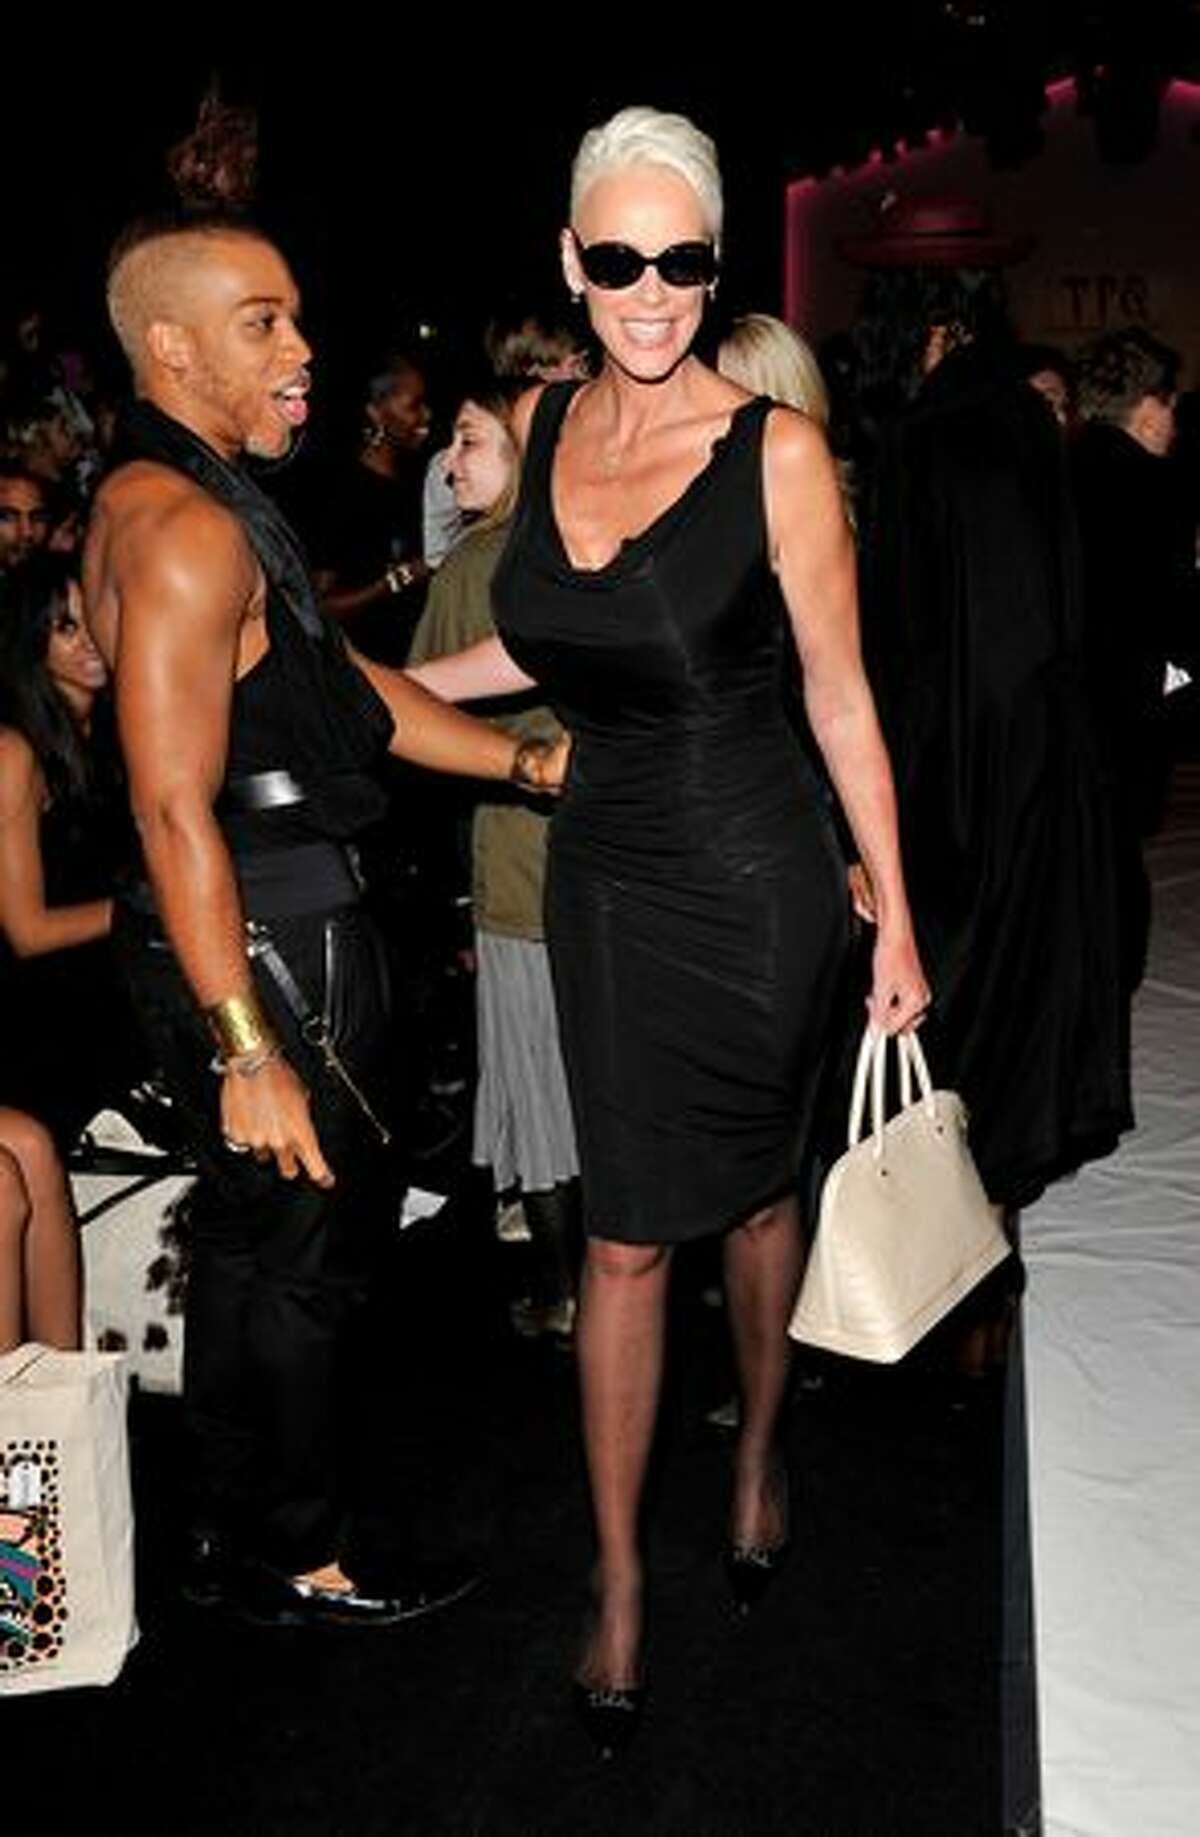 Brigitte Nielsen attends the PPQ Spring/Summer 2011 fashion show during LFW at Somerset House in London, England.